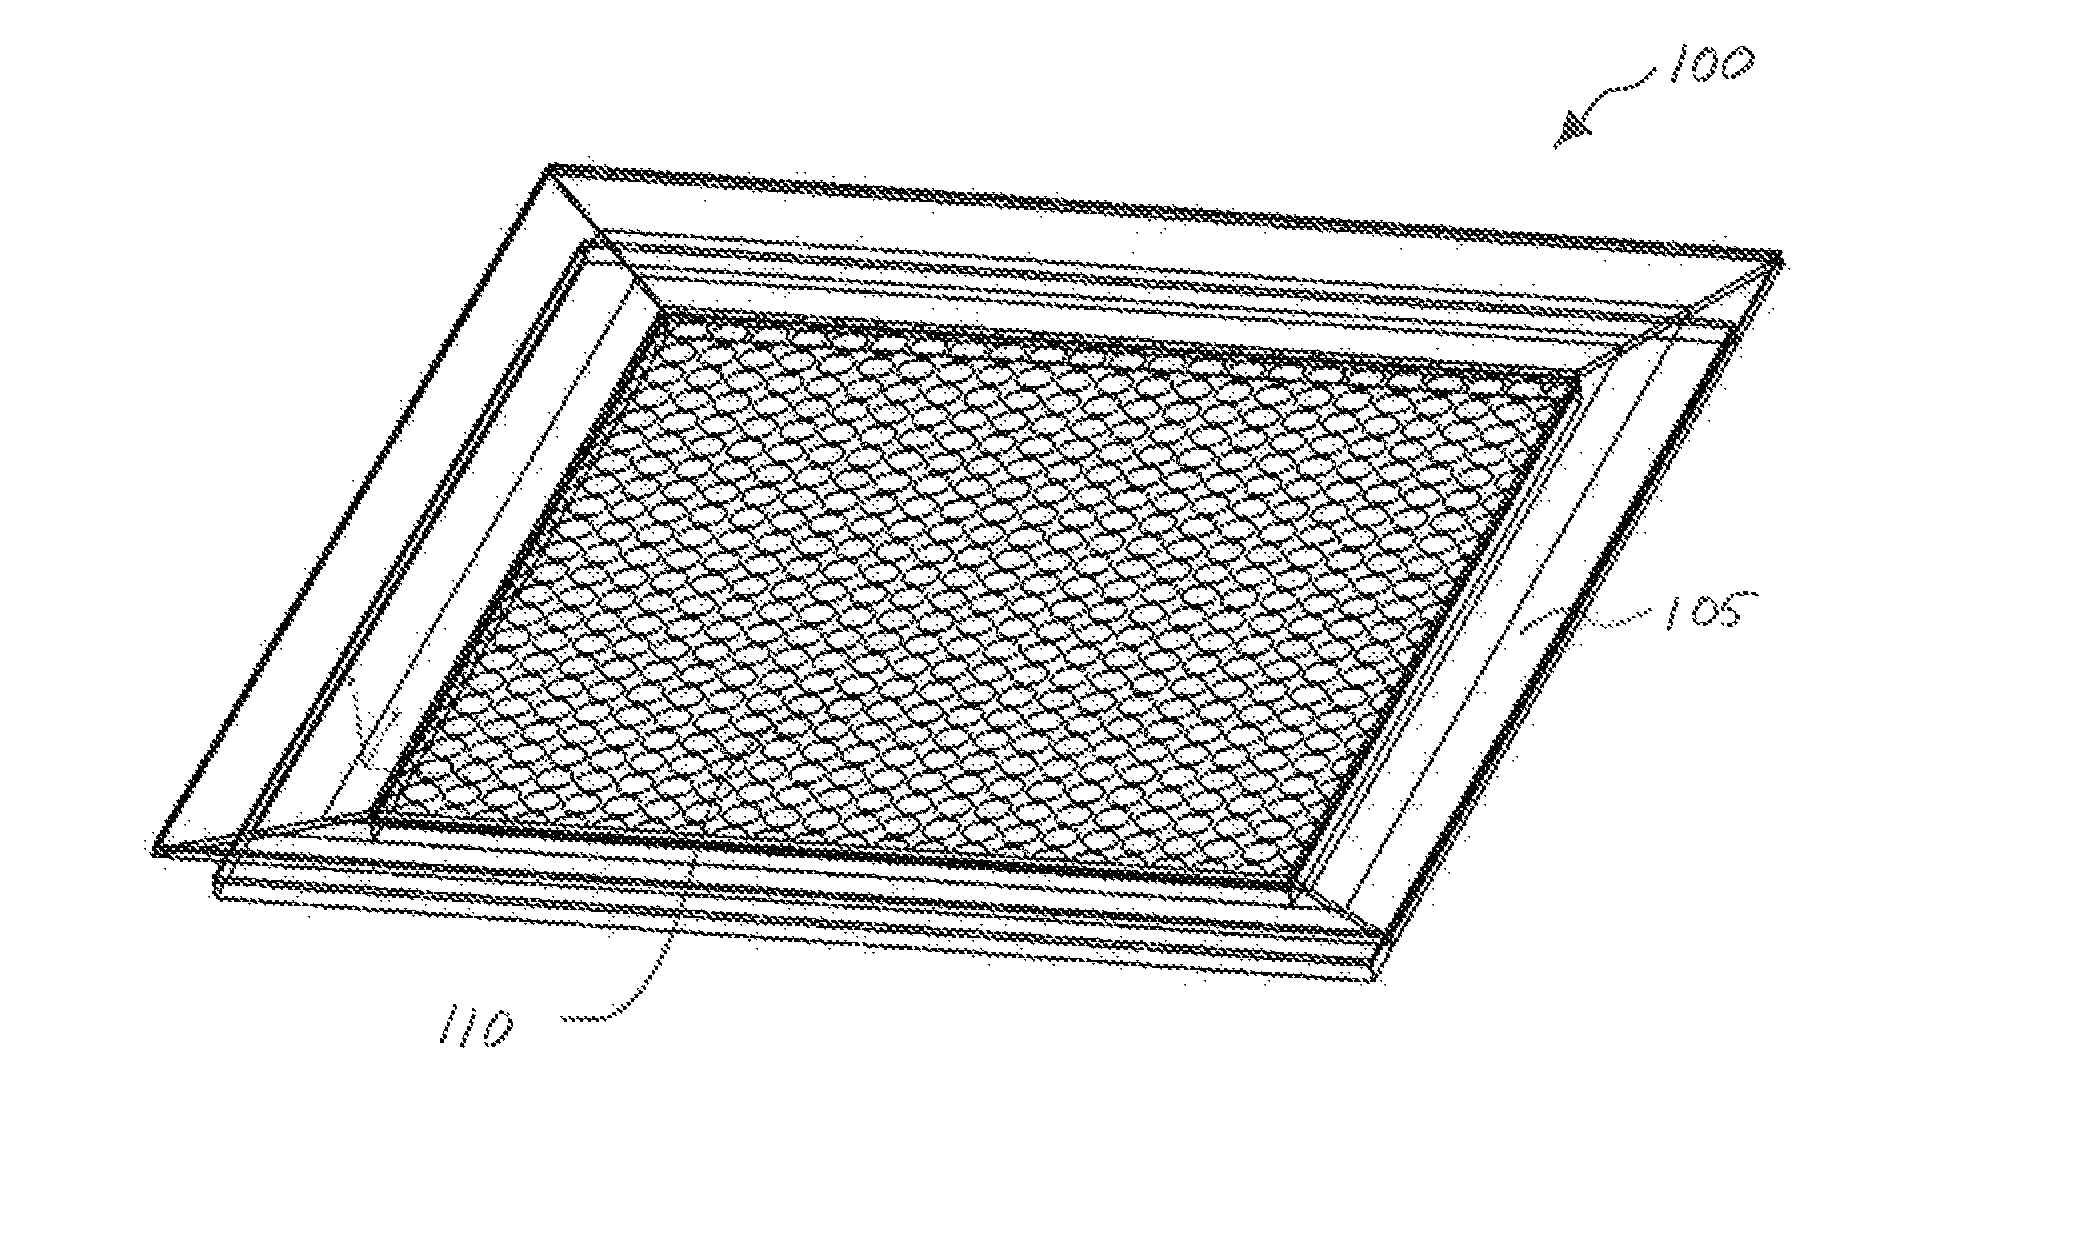 Method for integrating an antenna with a vehicle fuselage